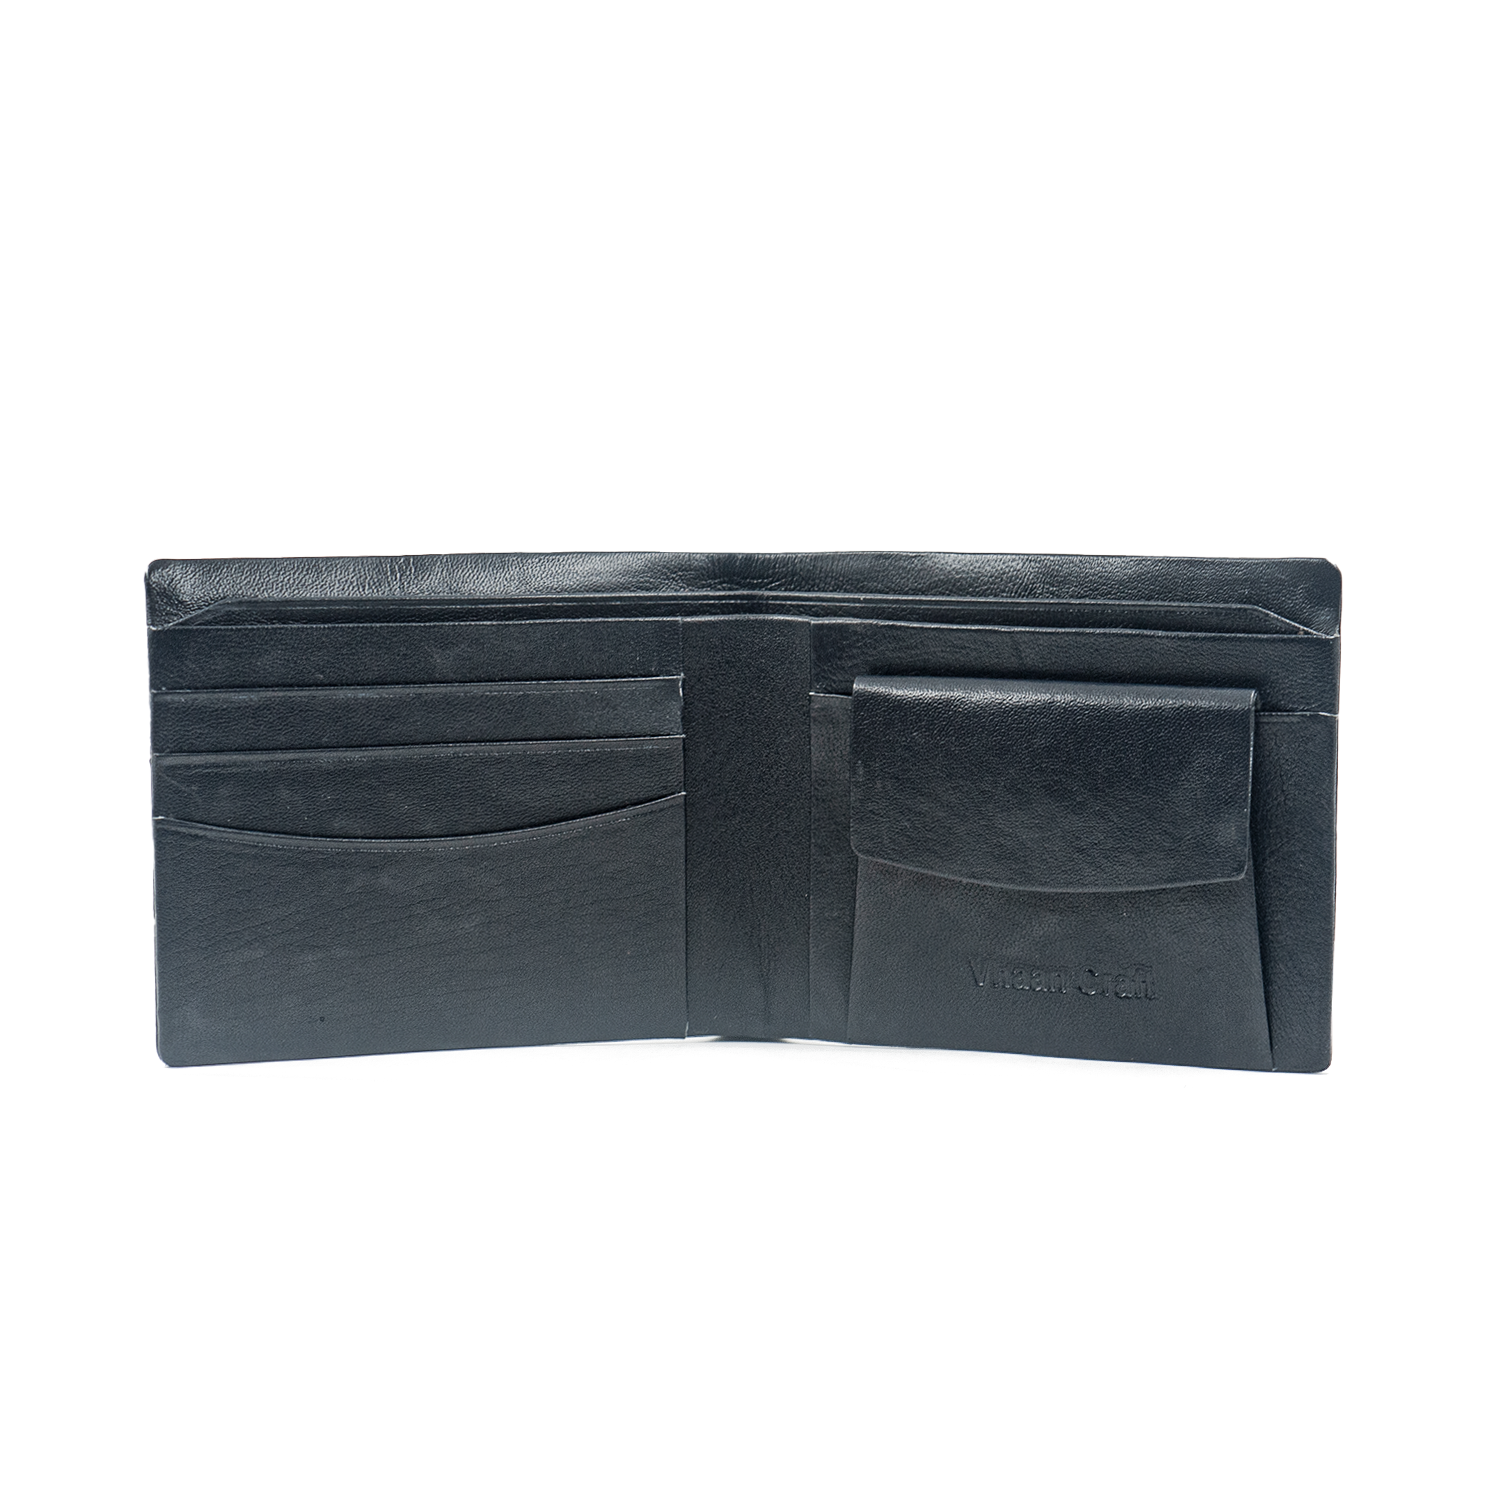 Seamless Elegance: RFID-Protected Stitchless Premium NAPPA Leather Wallets for Men - Black